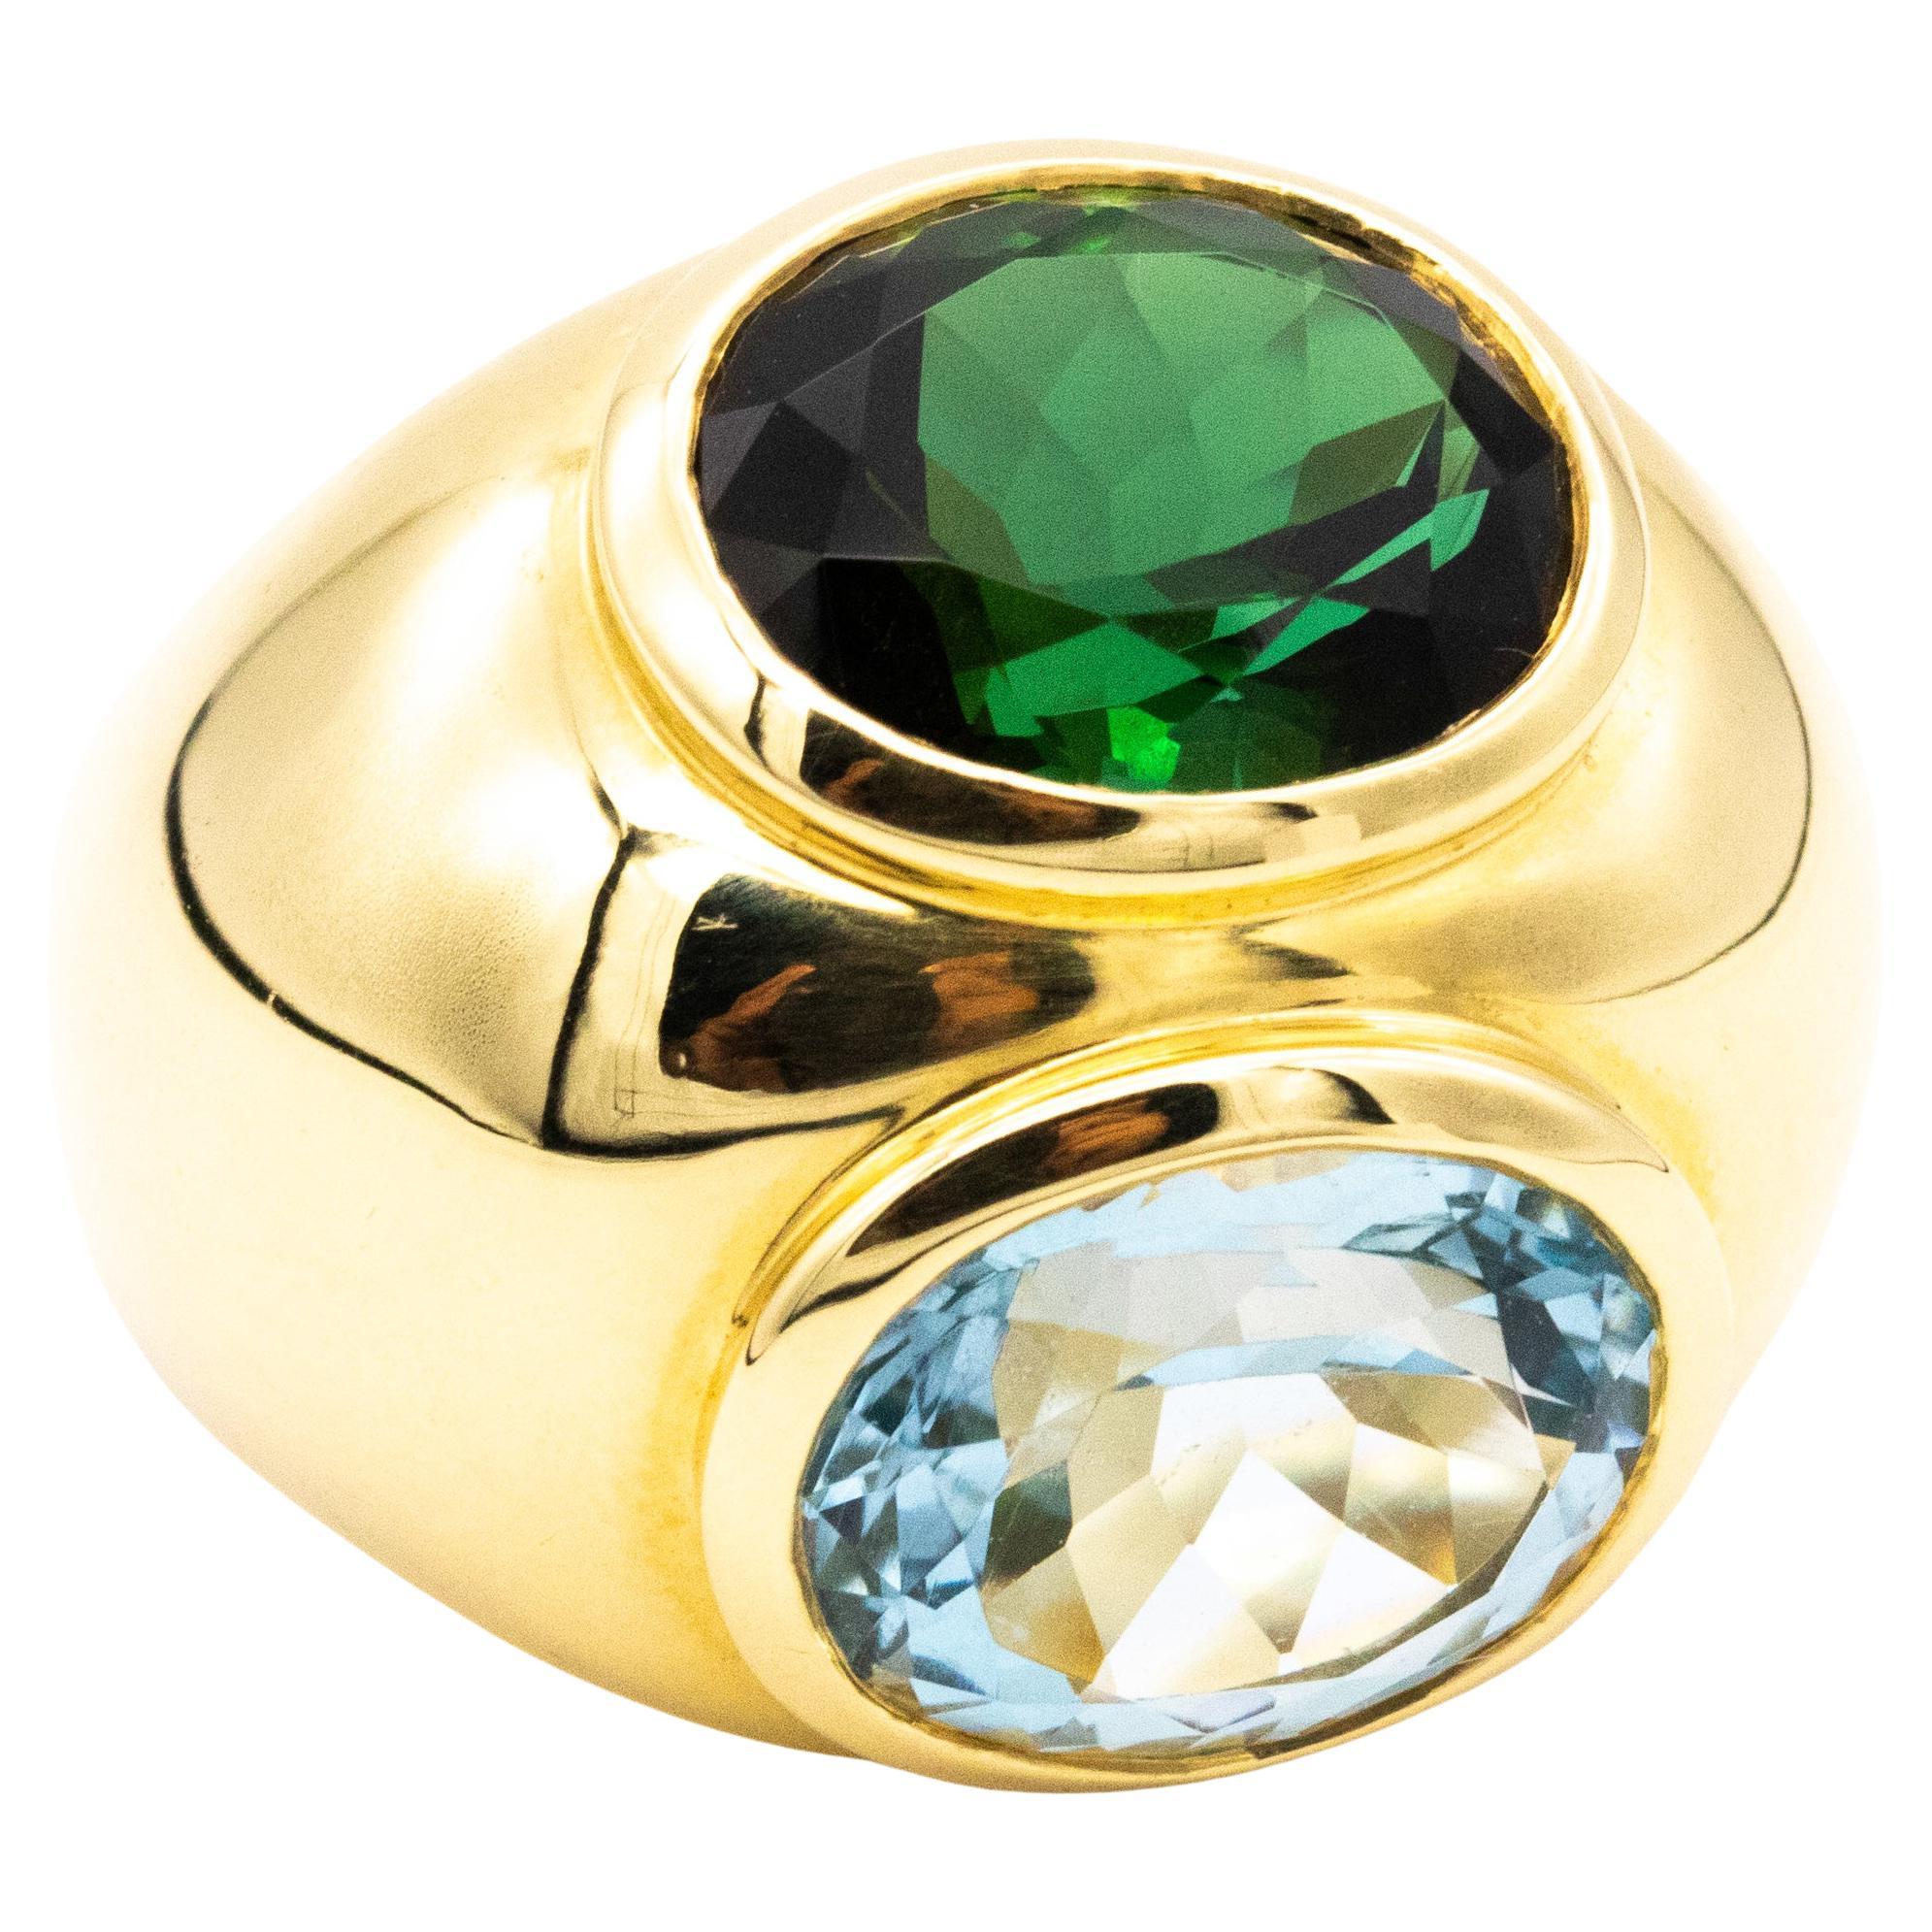 Tiffany & Co by Paloma Picasso Doppio Ring in 18Kt with Aquamarine & Tourmaline